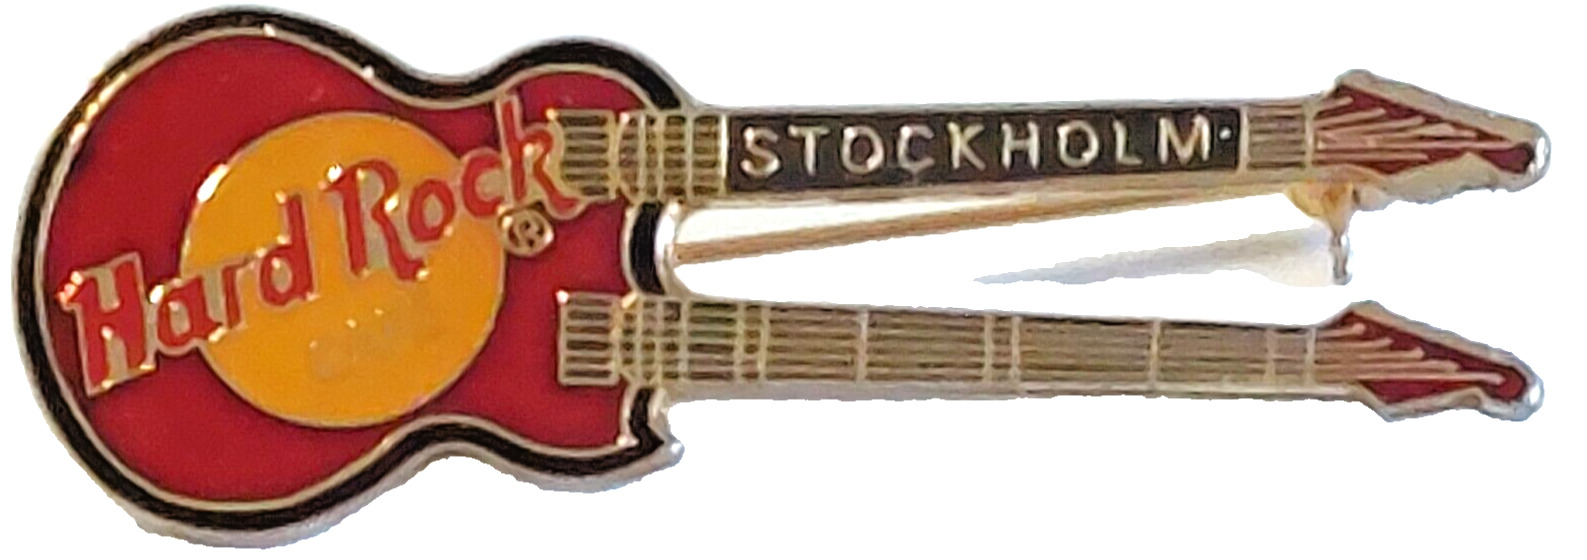 Hard Rock Cafe Stockholm Double Head Guitar Pin (107)